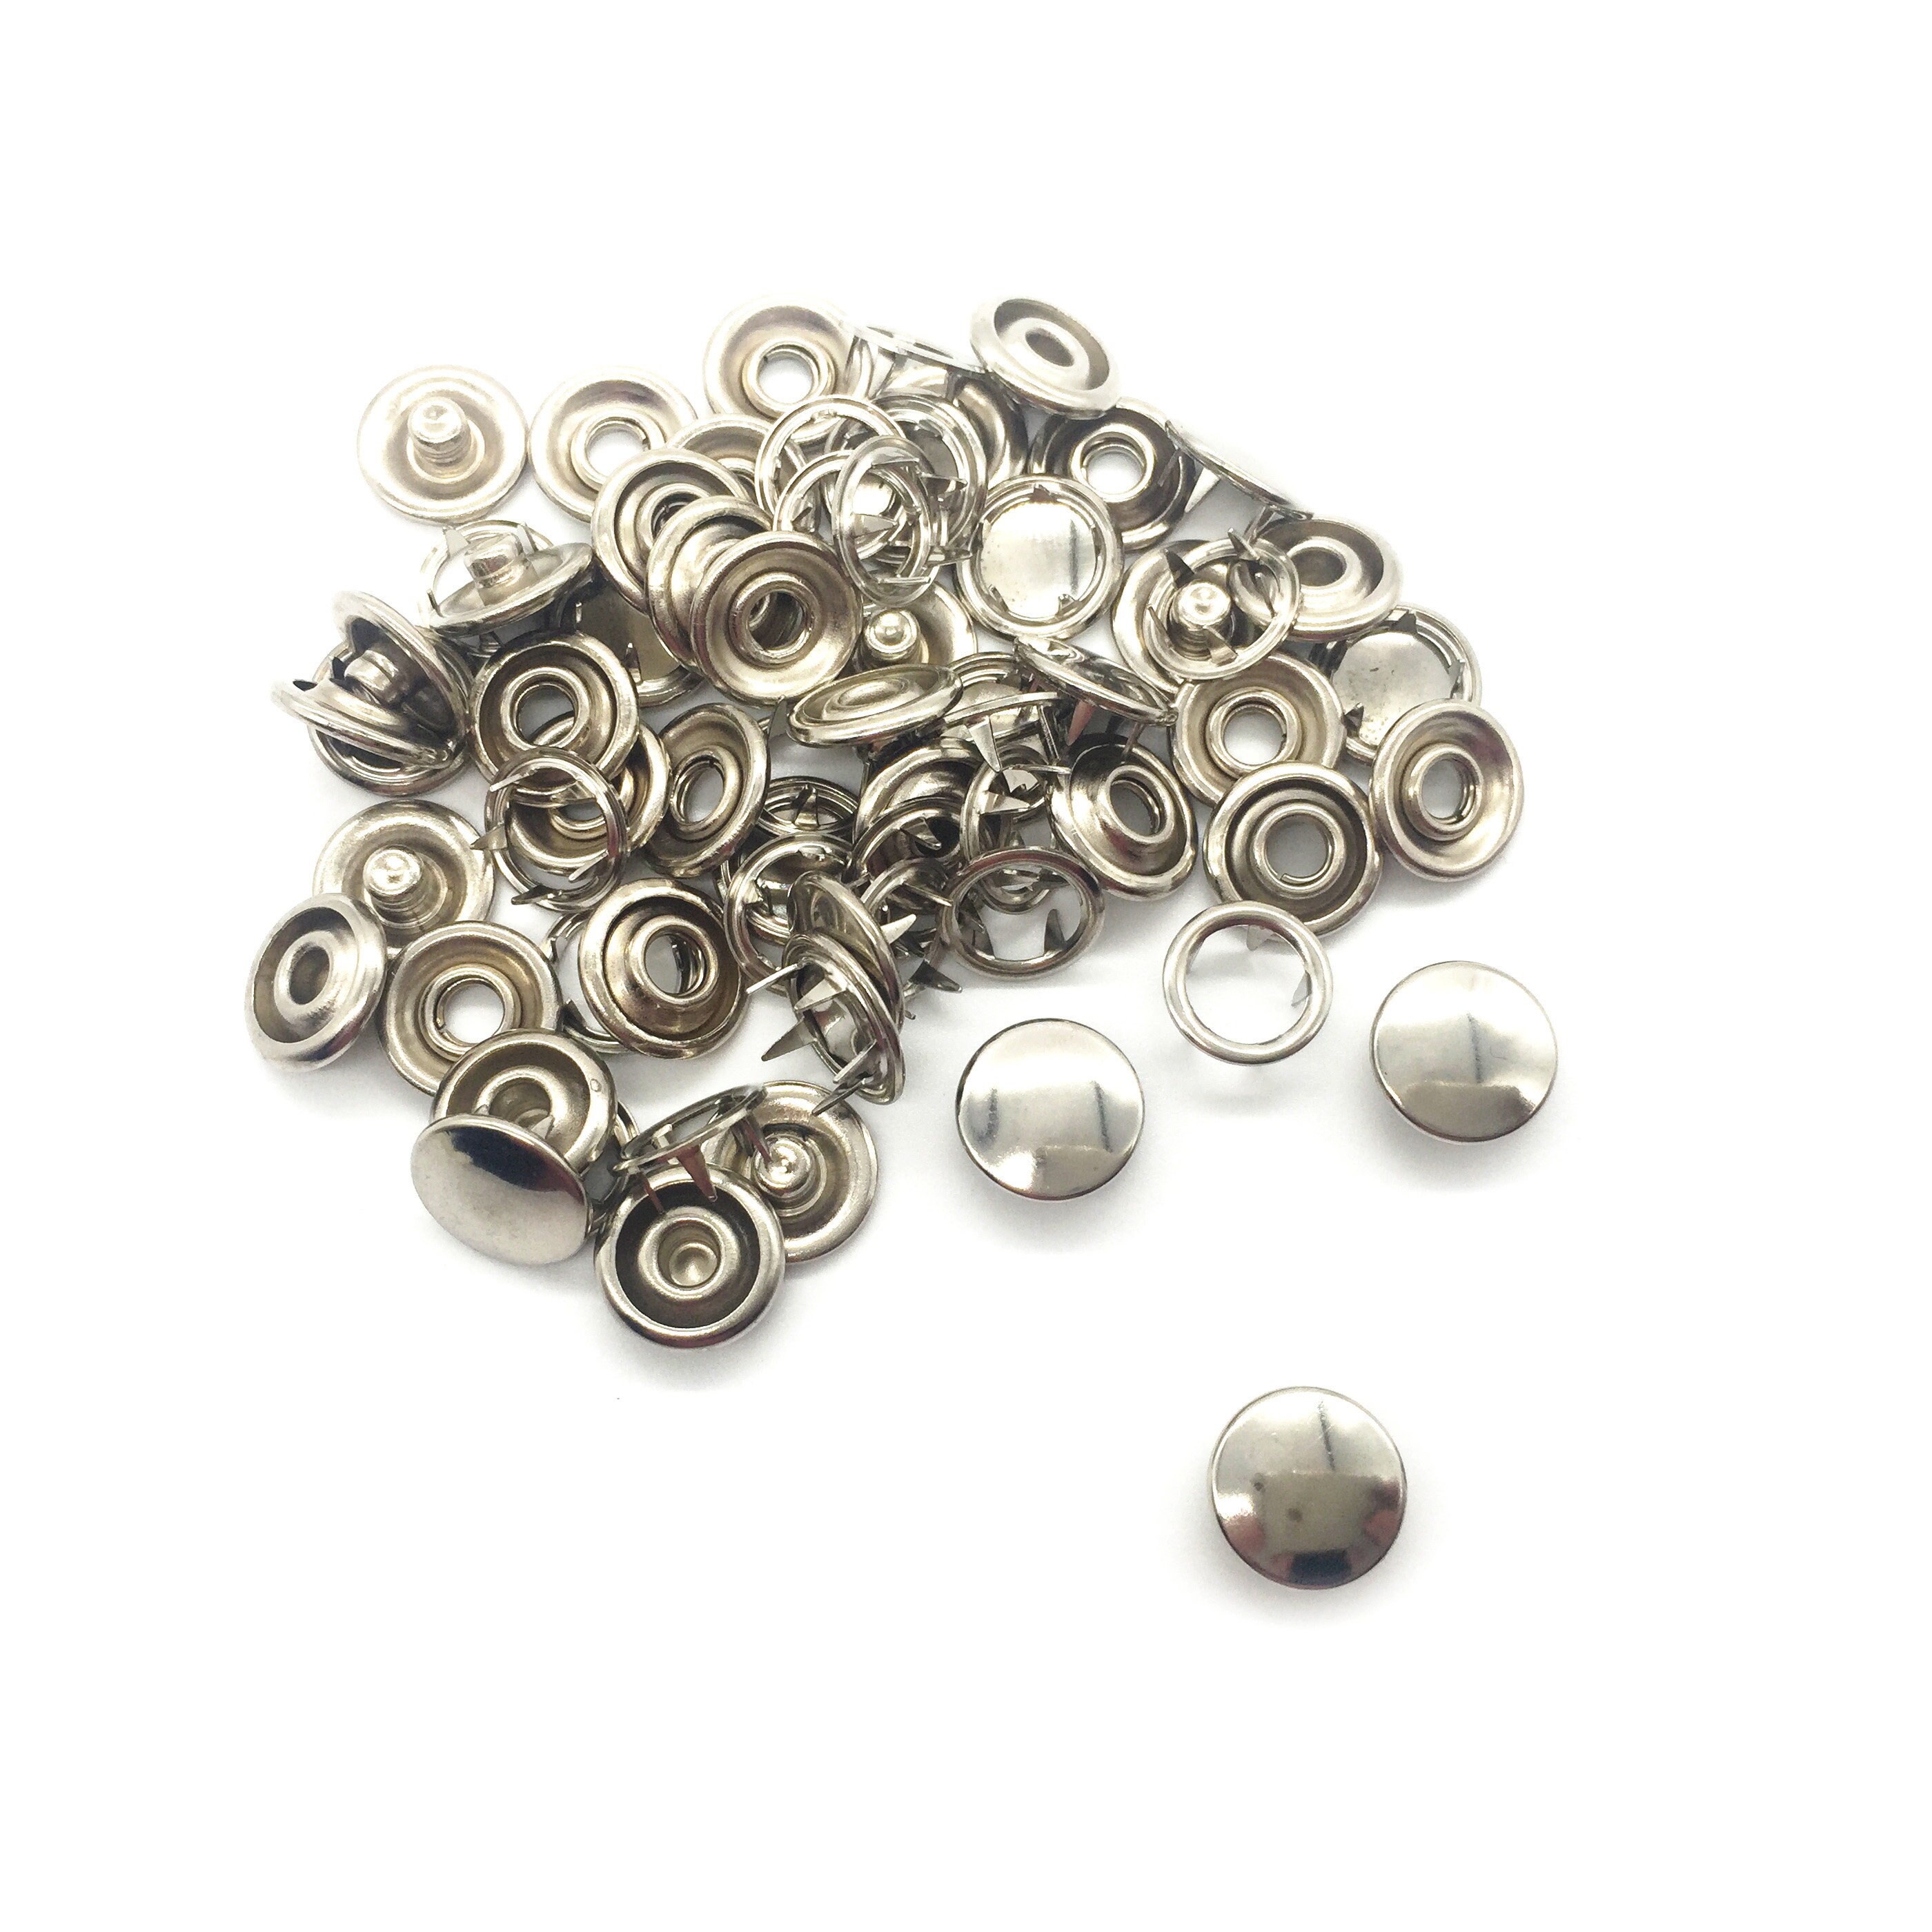 20 Blue Metal Snaps Size 15 With Dies, Clothing Snaps, CAP 10.5mm Snap  Buttons for Clothes, Jersey Gripper Snap Fasteners, Stud Poppers 